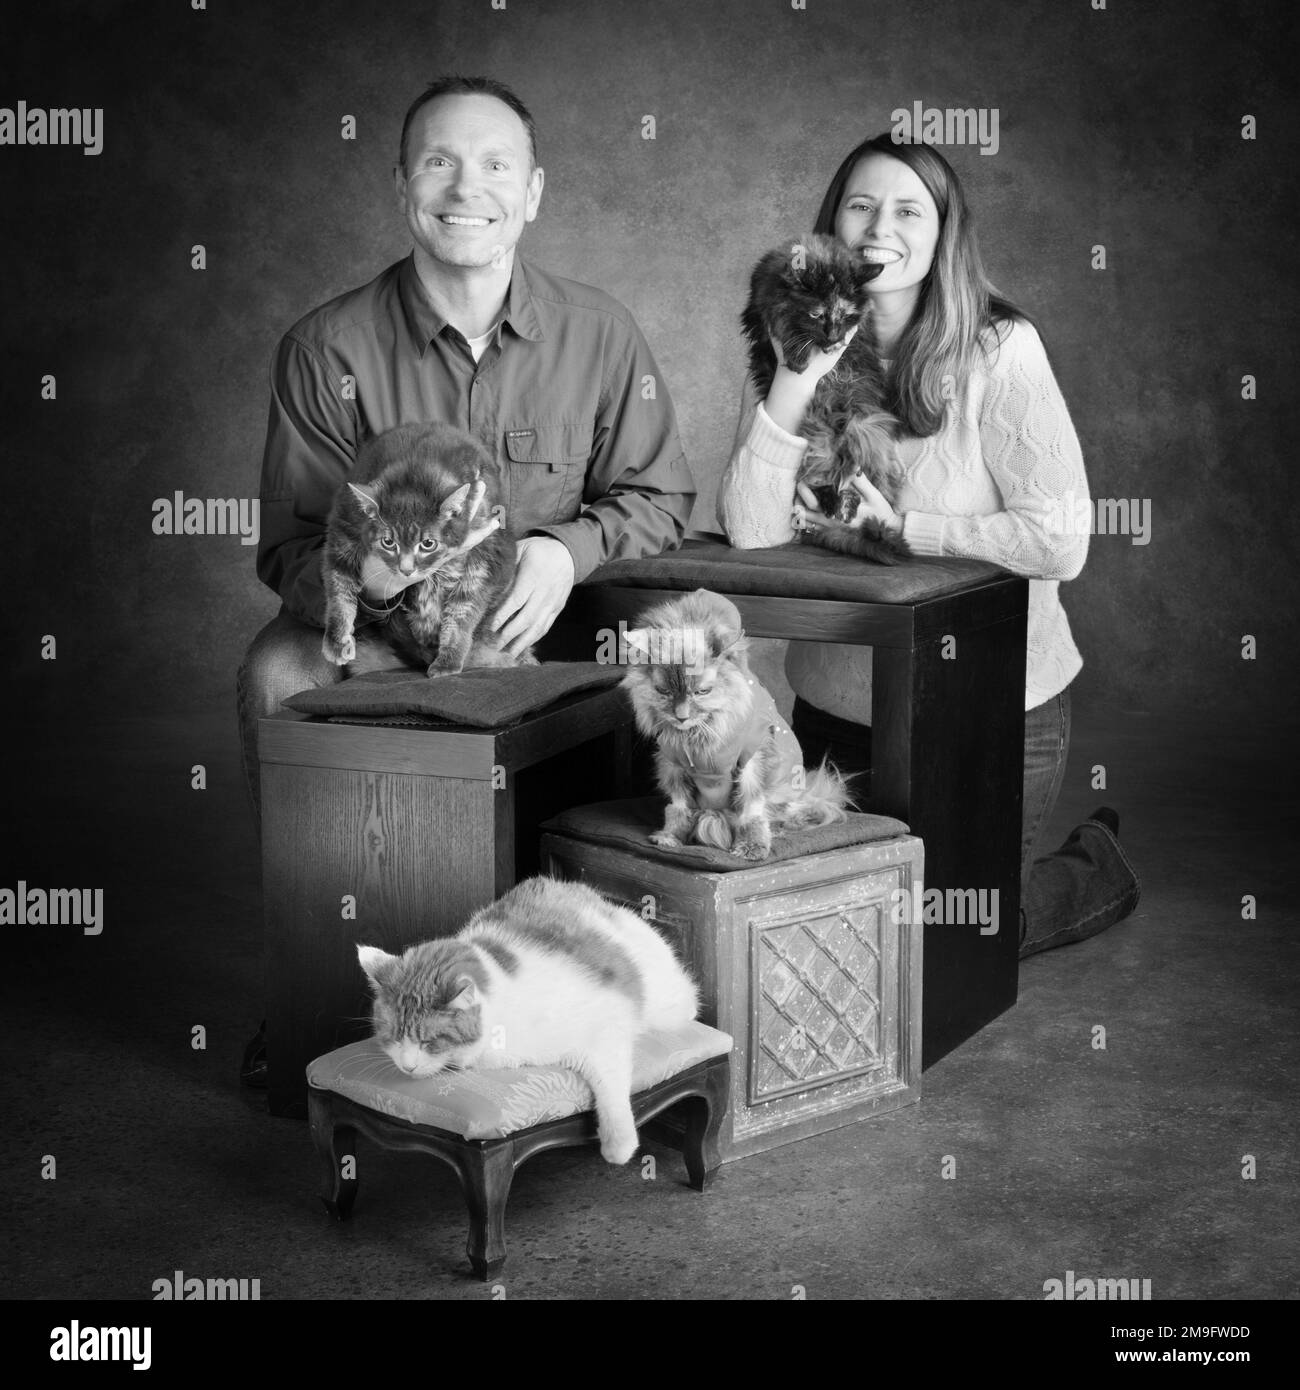 Studio portrait of smiling man and woman with four cats Stock Photo